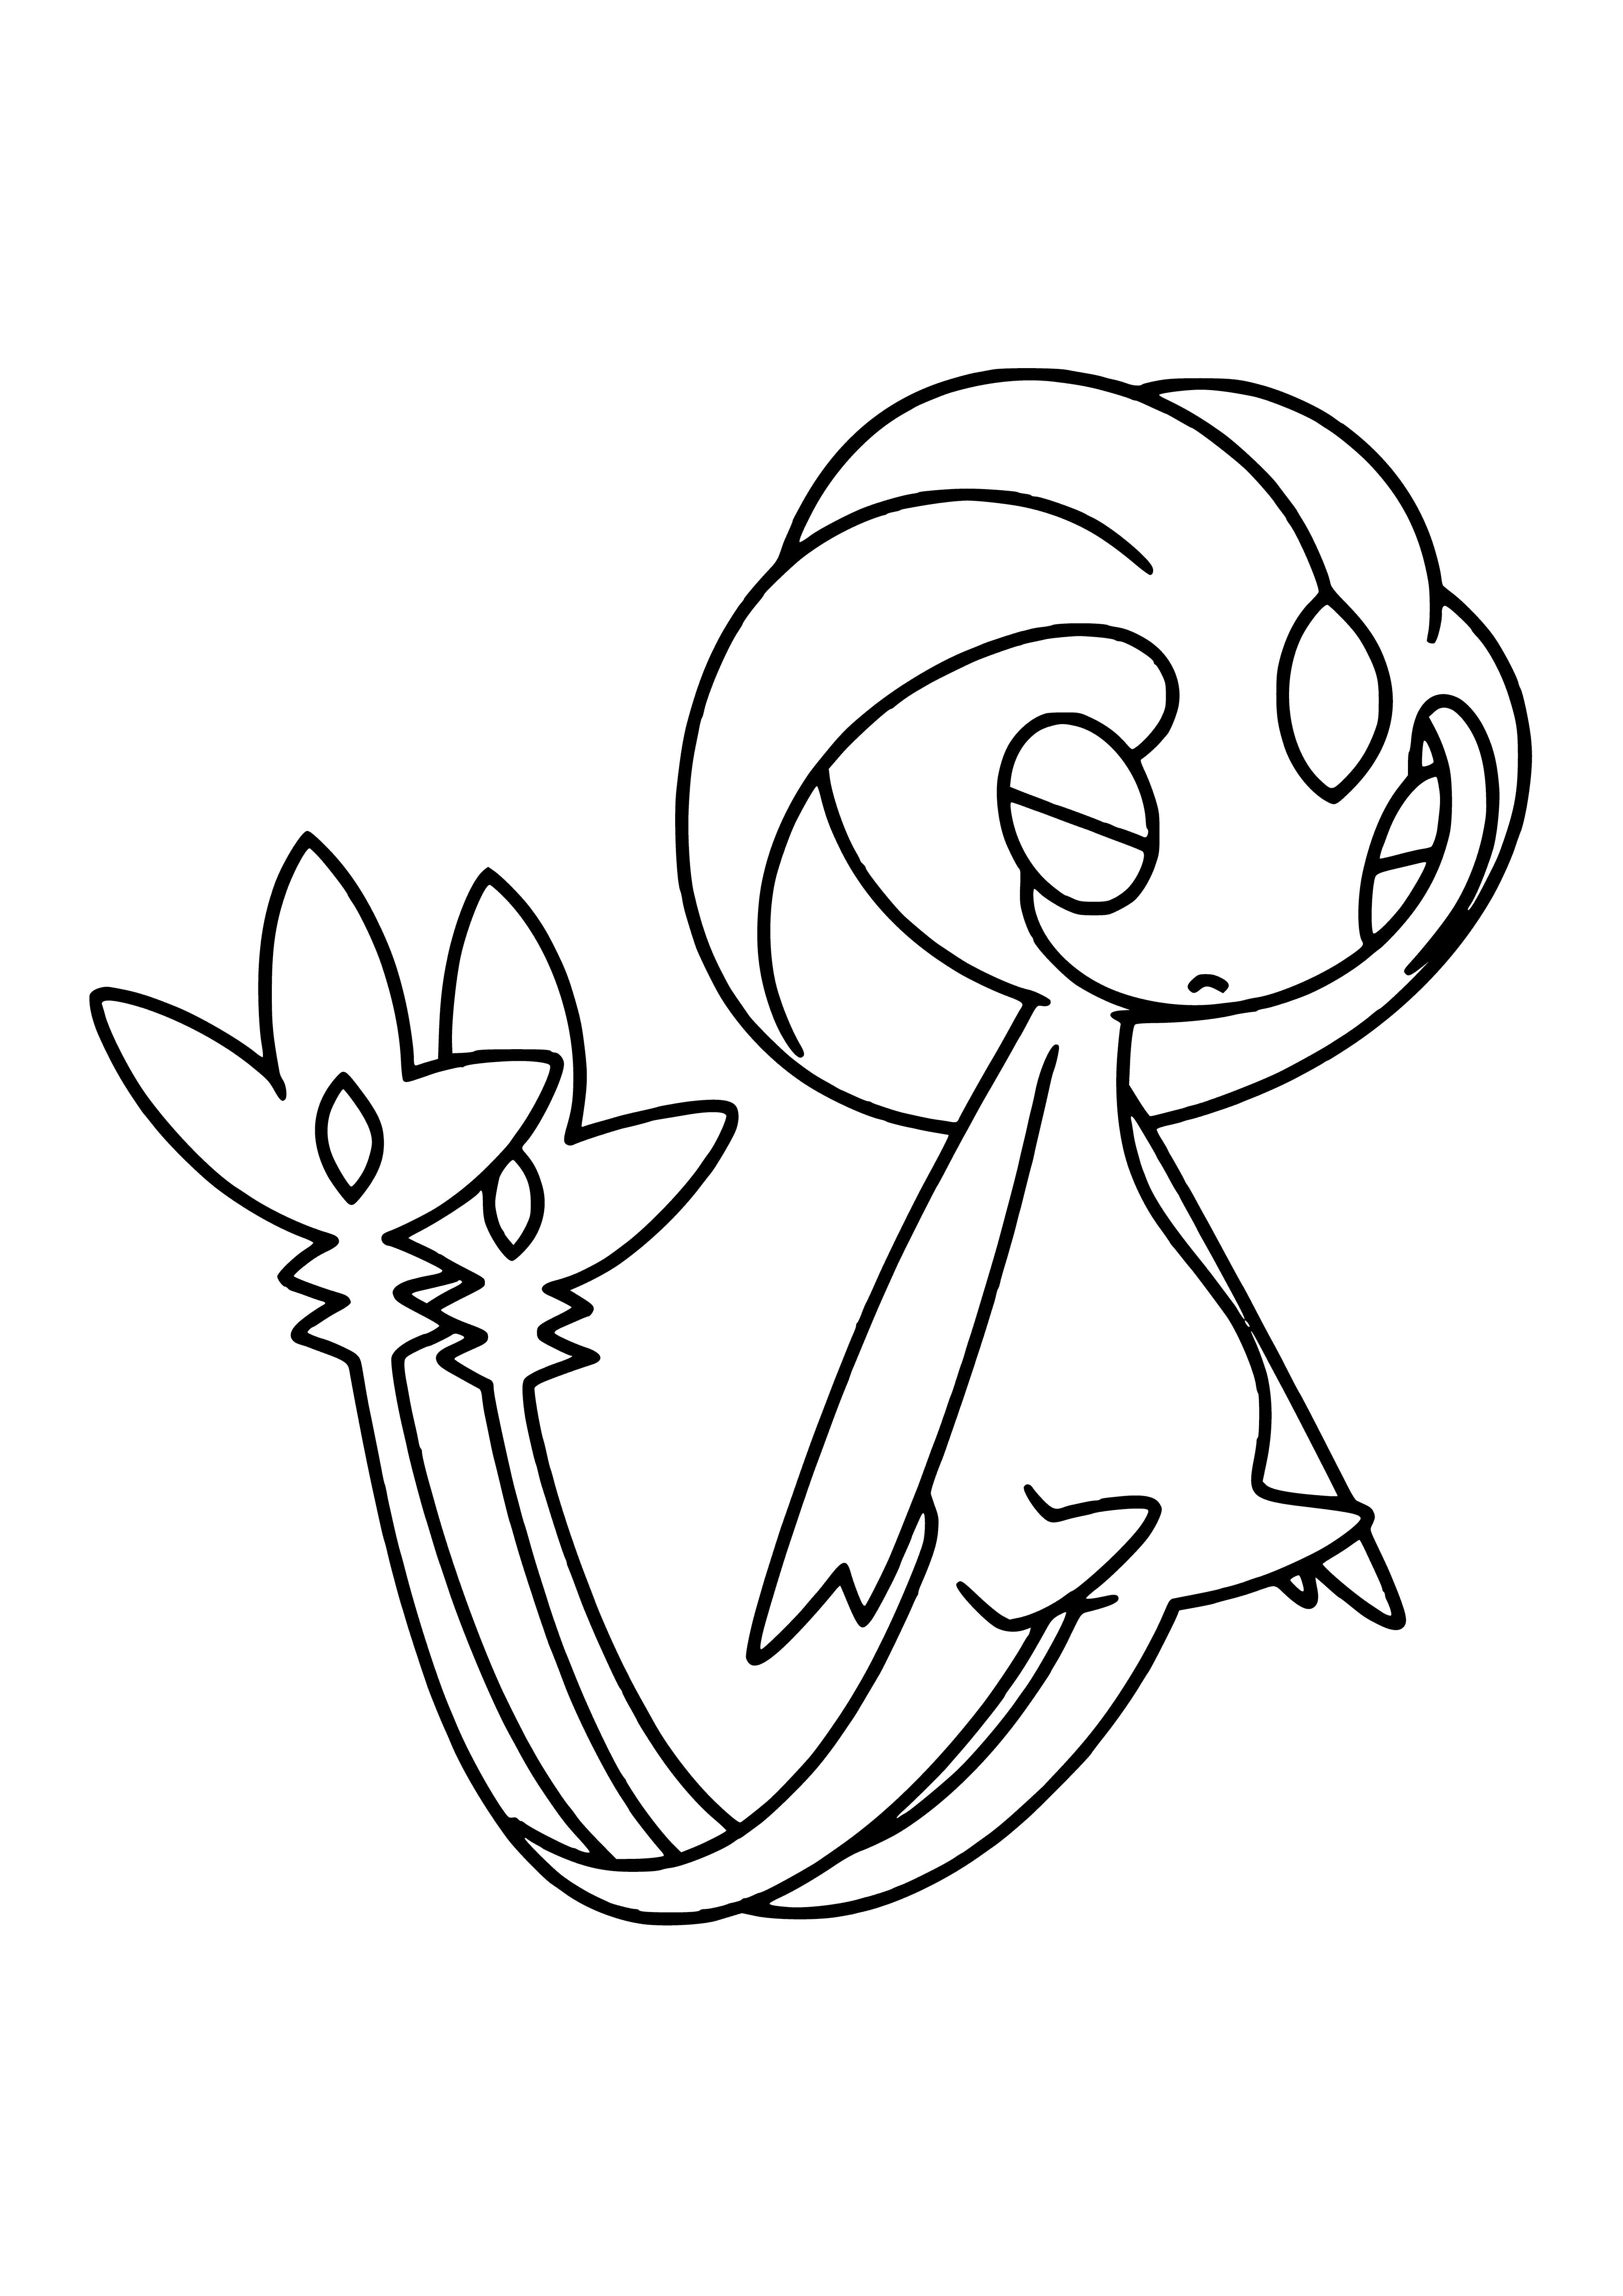 coloring page: Uxie is a Legendary Pokemon with a round body, three tails, blue eyes, and a red jewel.